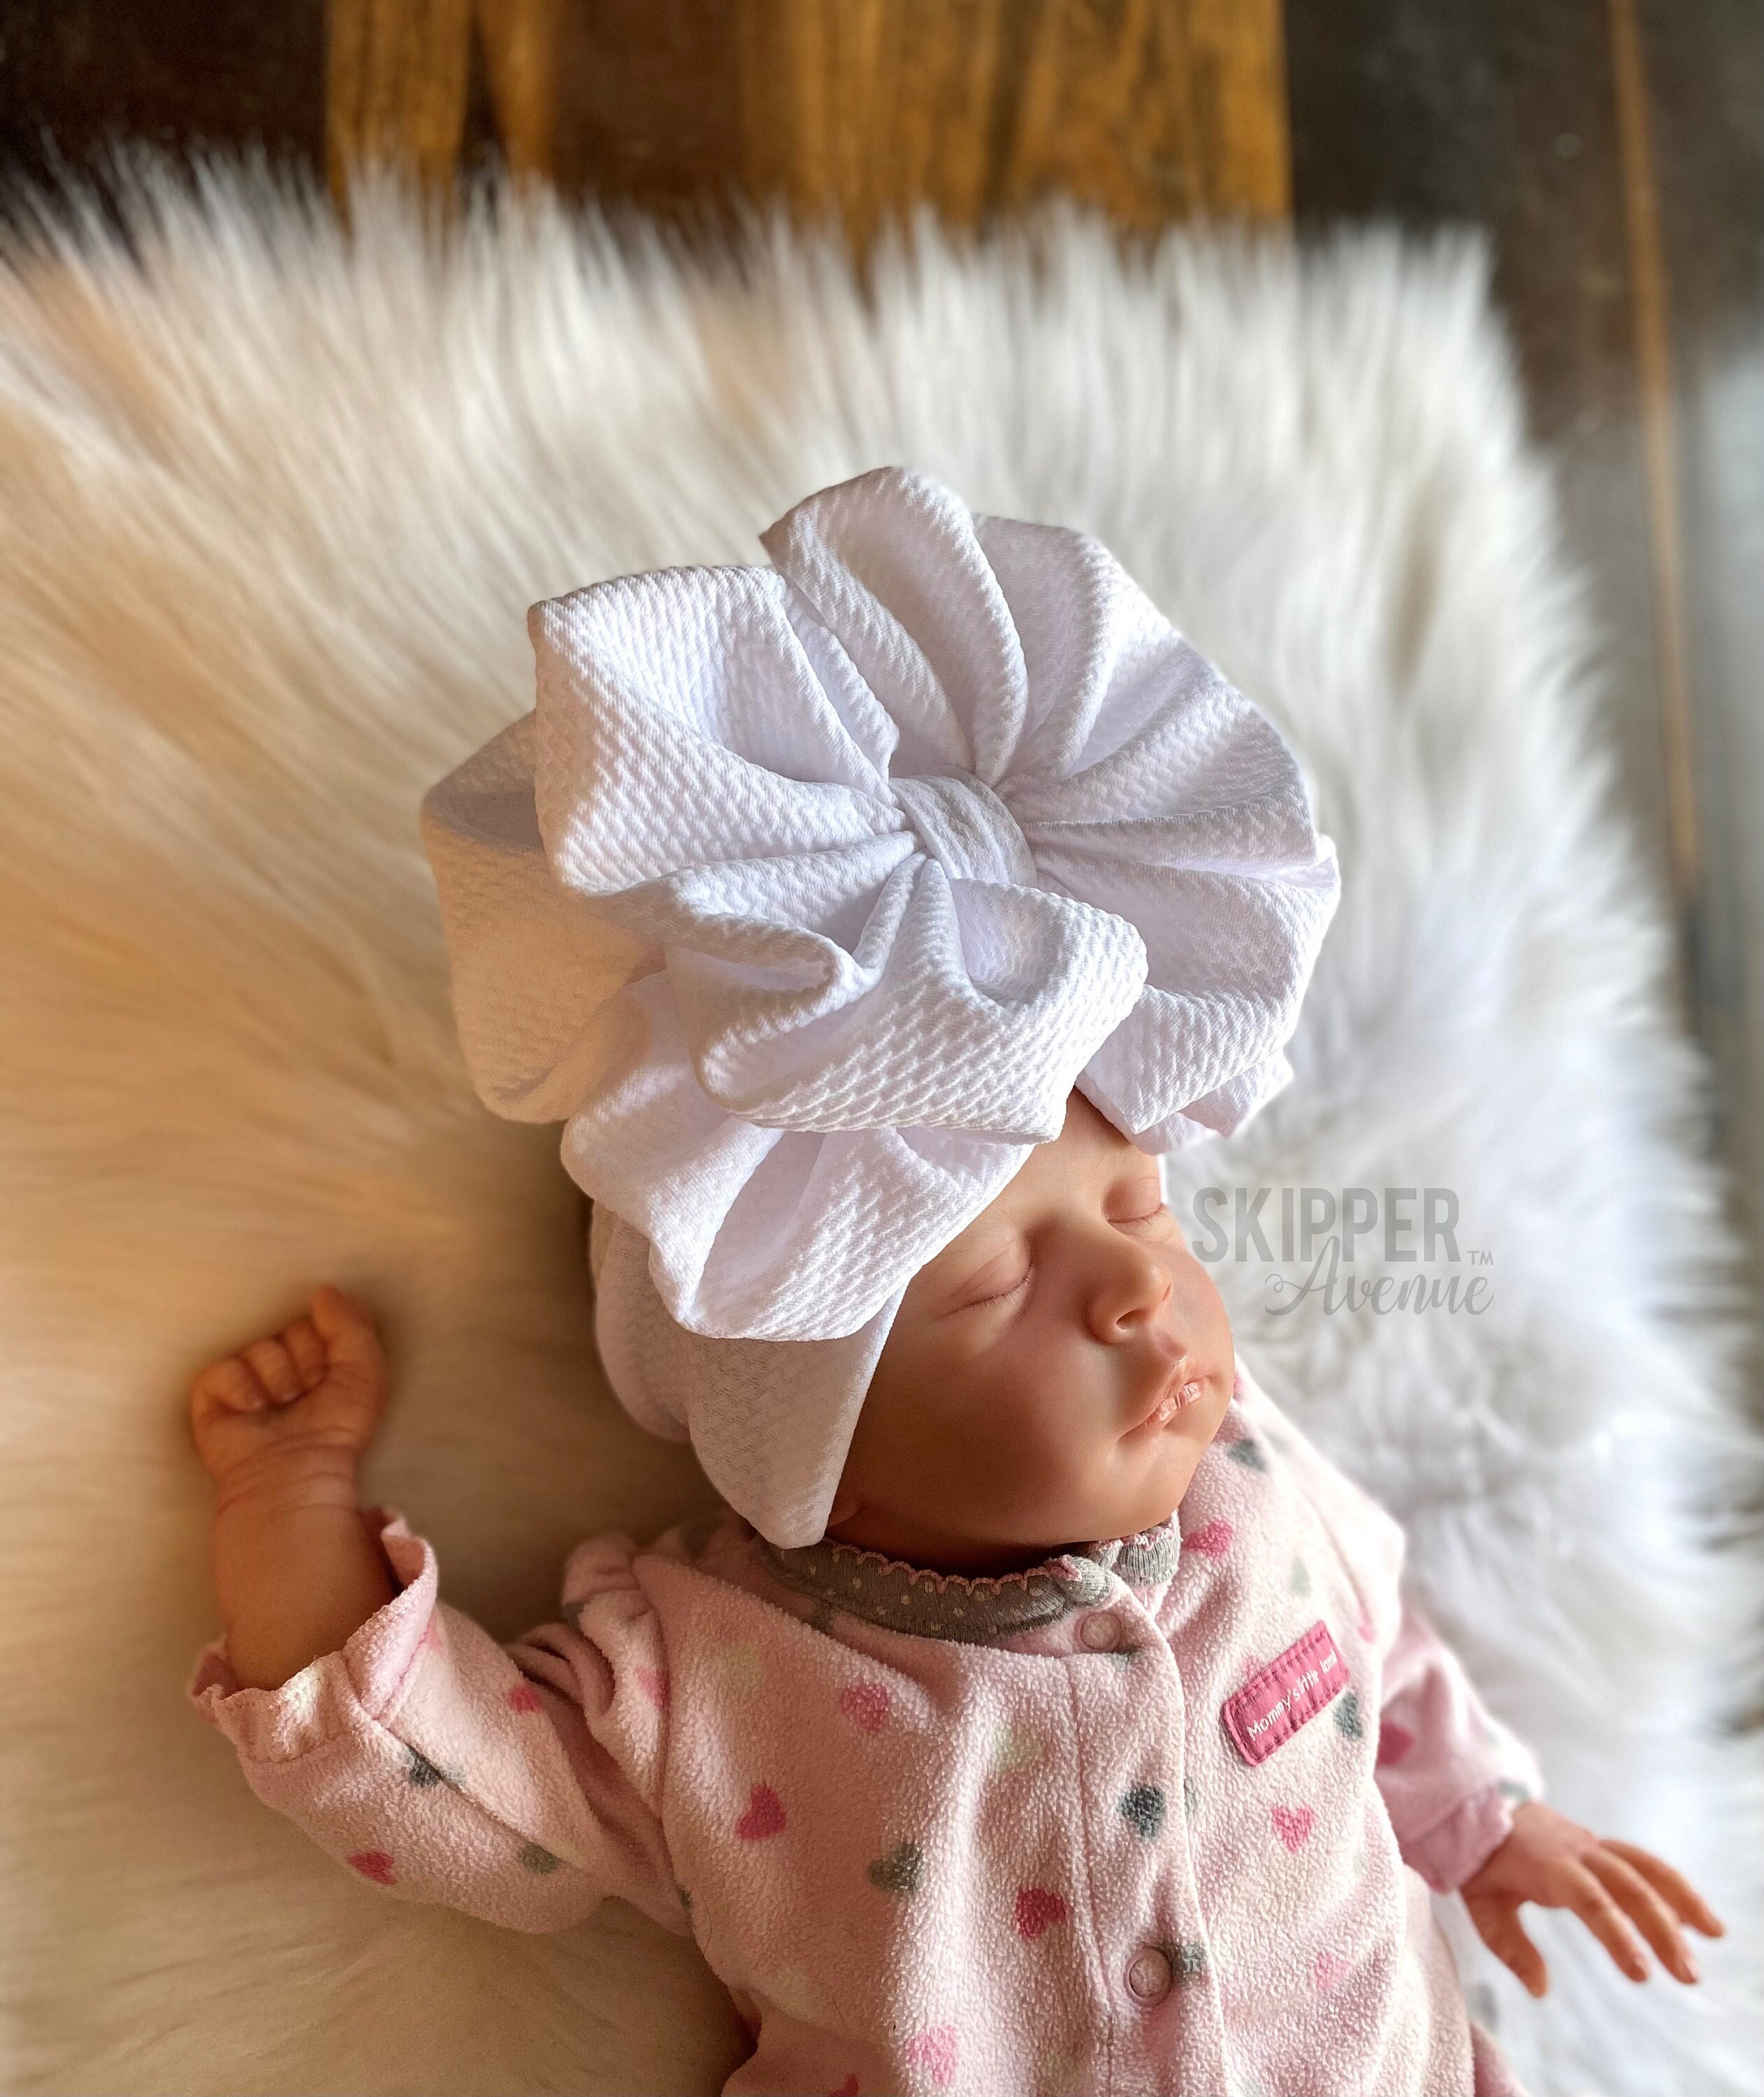 Beautiful Bows Boutique Large Ivory Ruffle Girls Hair Bow Clip or Baby Headband 4 inch (Shown) / Permanently Attached to Headband